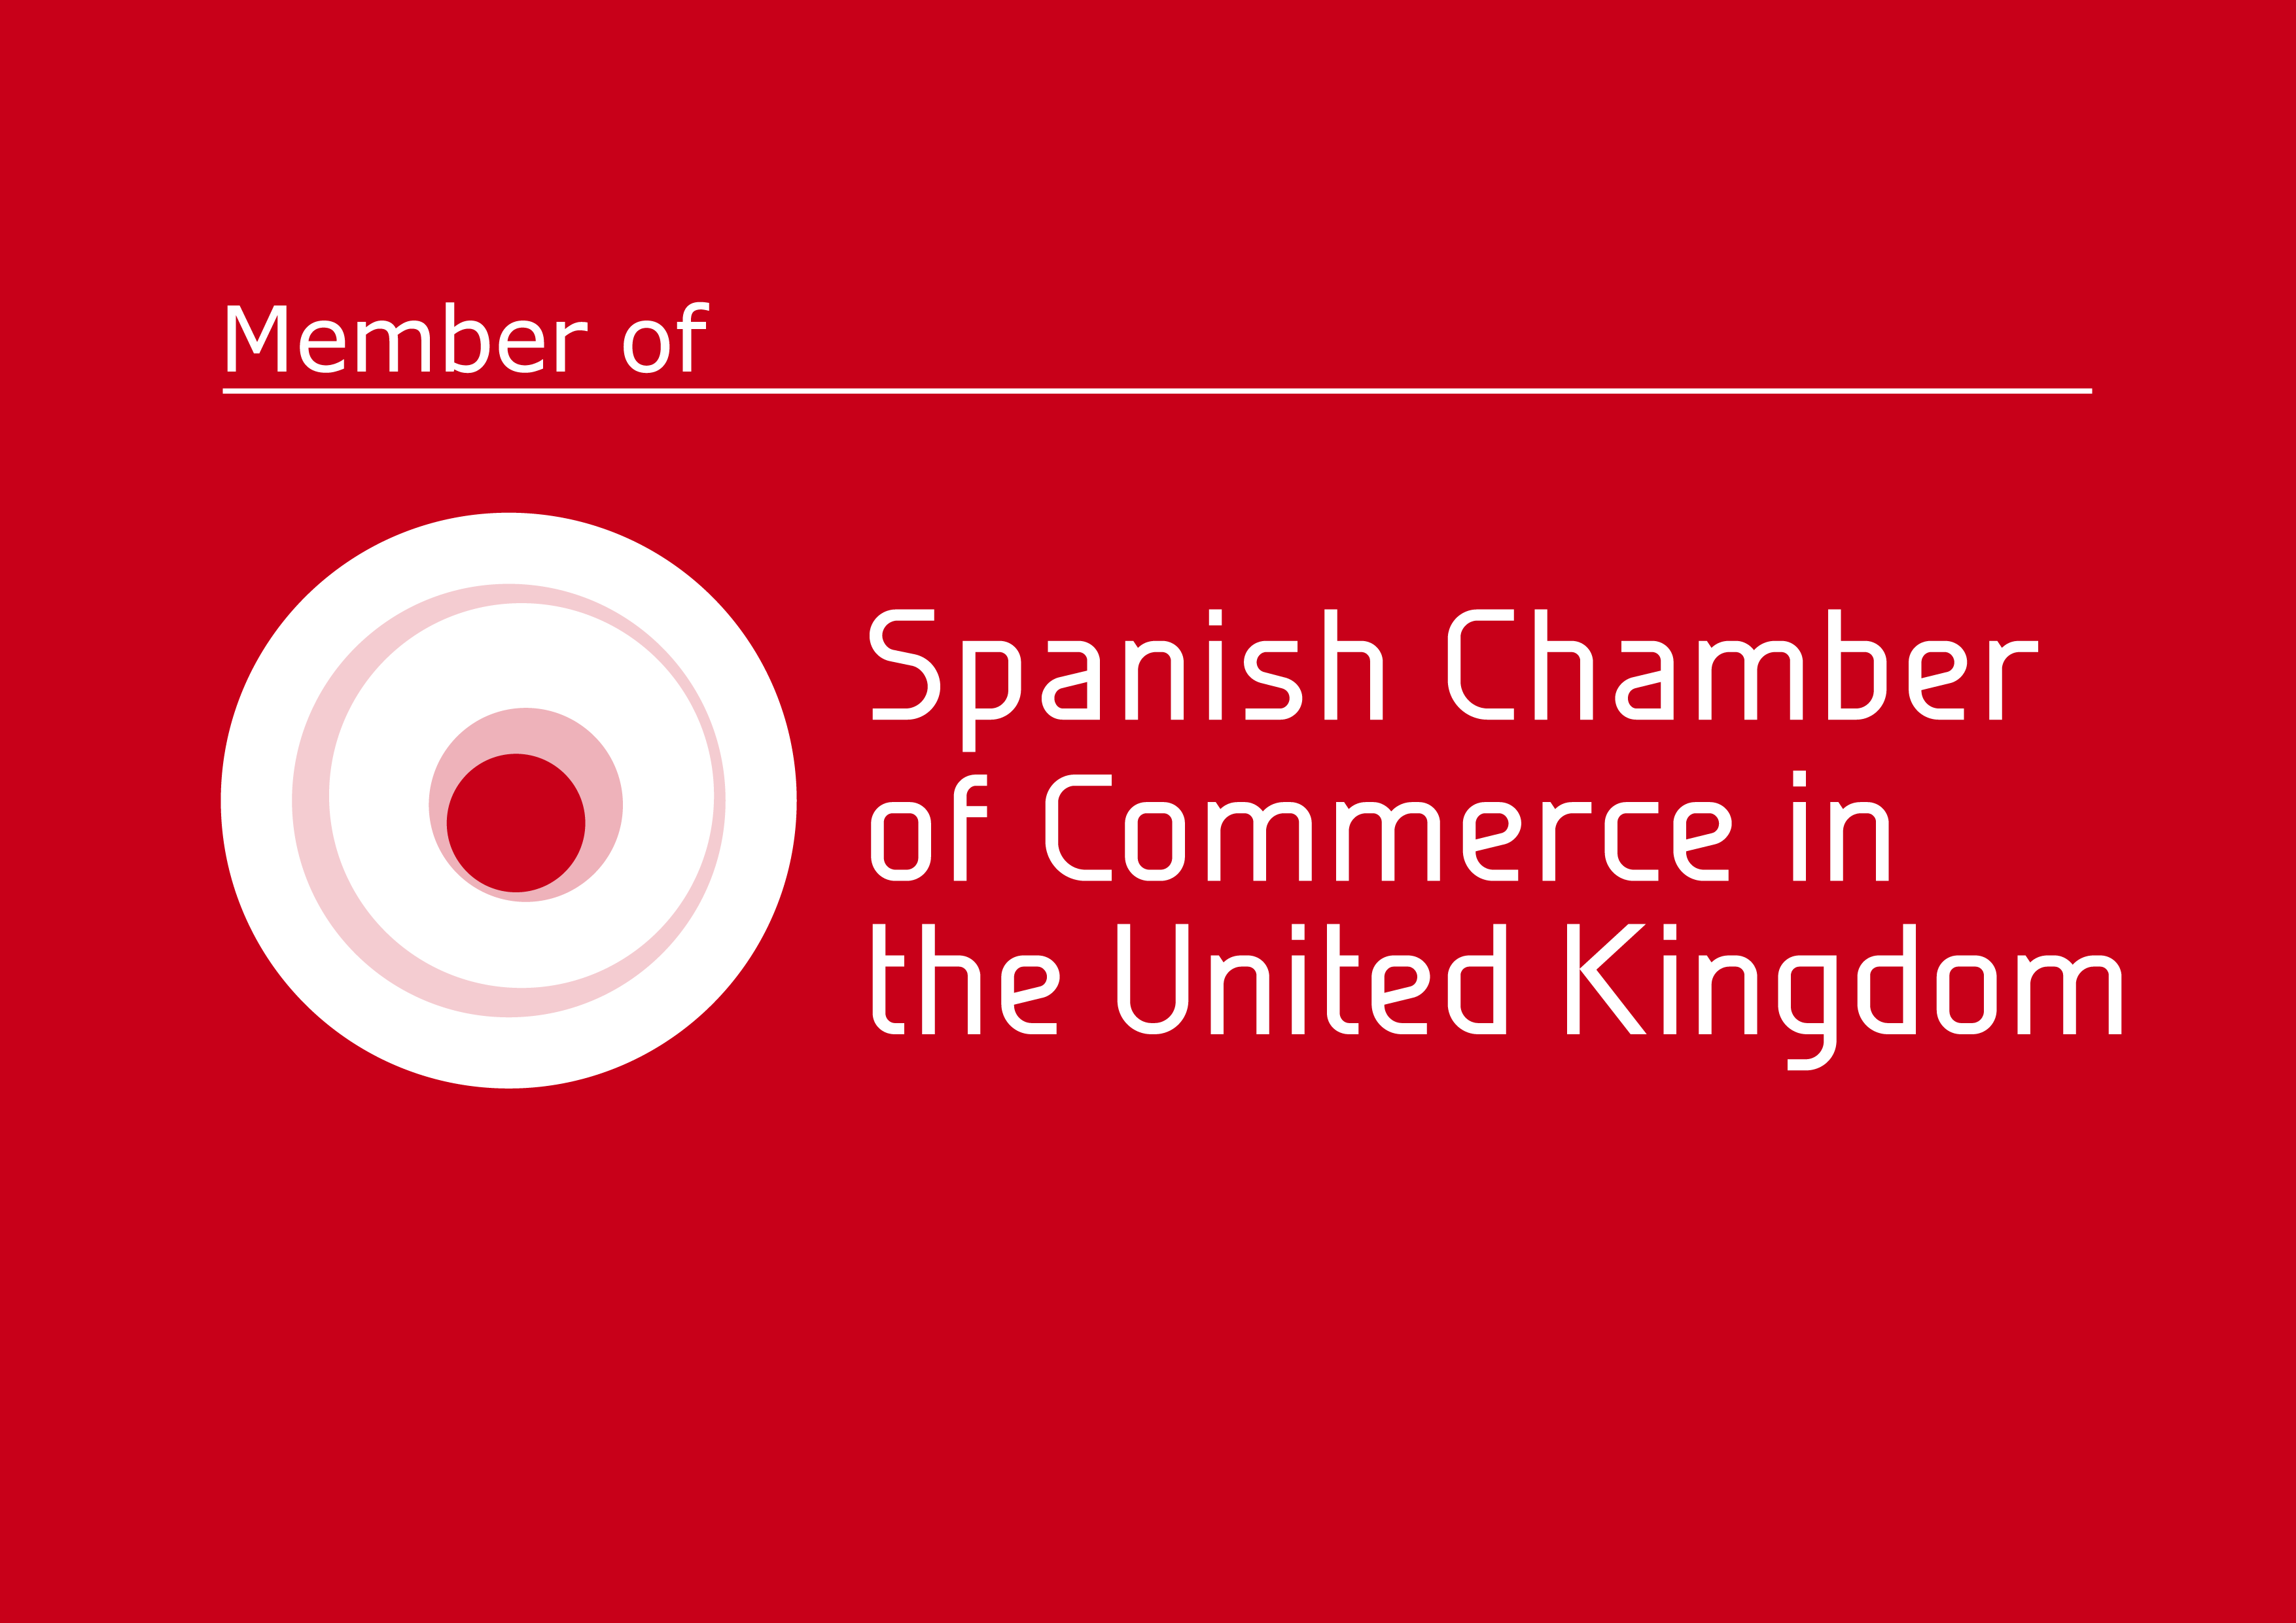 Web Red O Logo - Download our logo. Spanish Chamber of Commerce in Great Britain